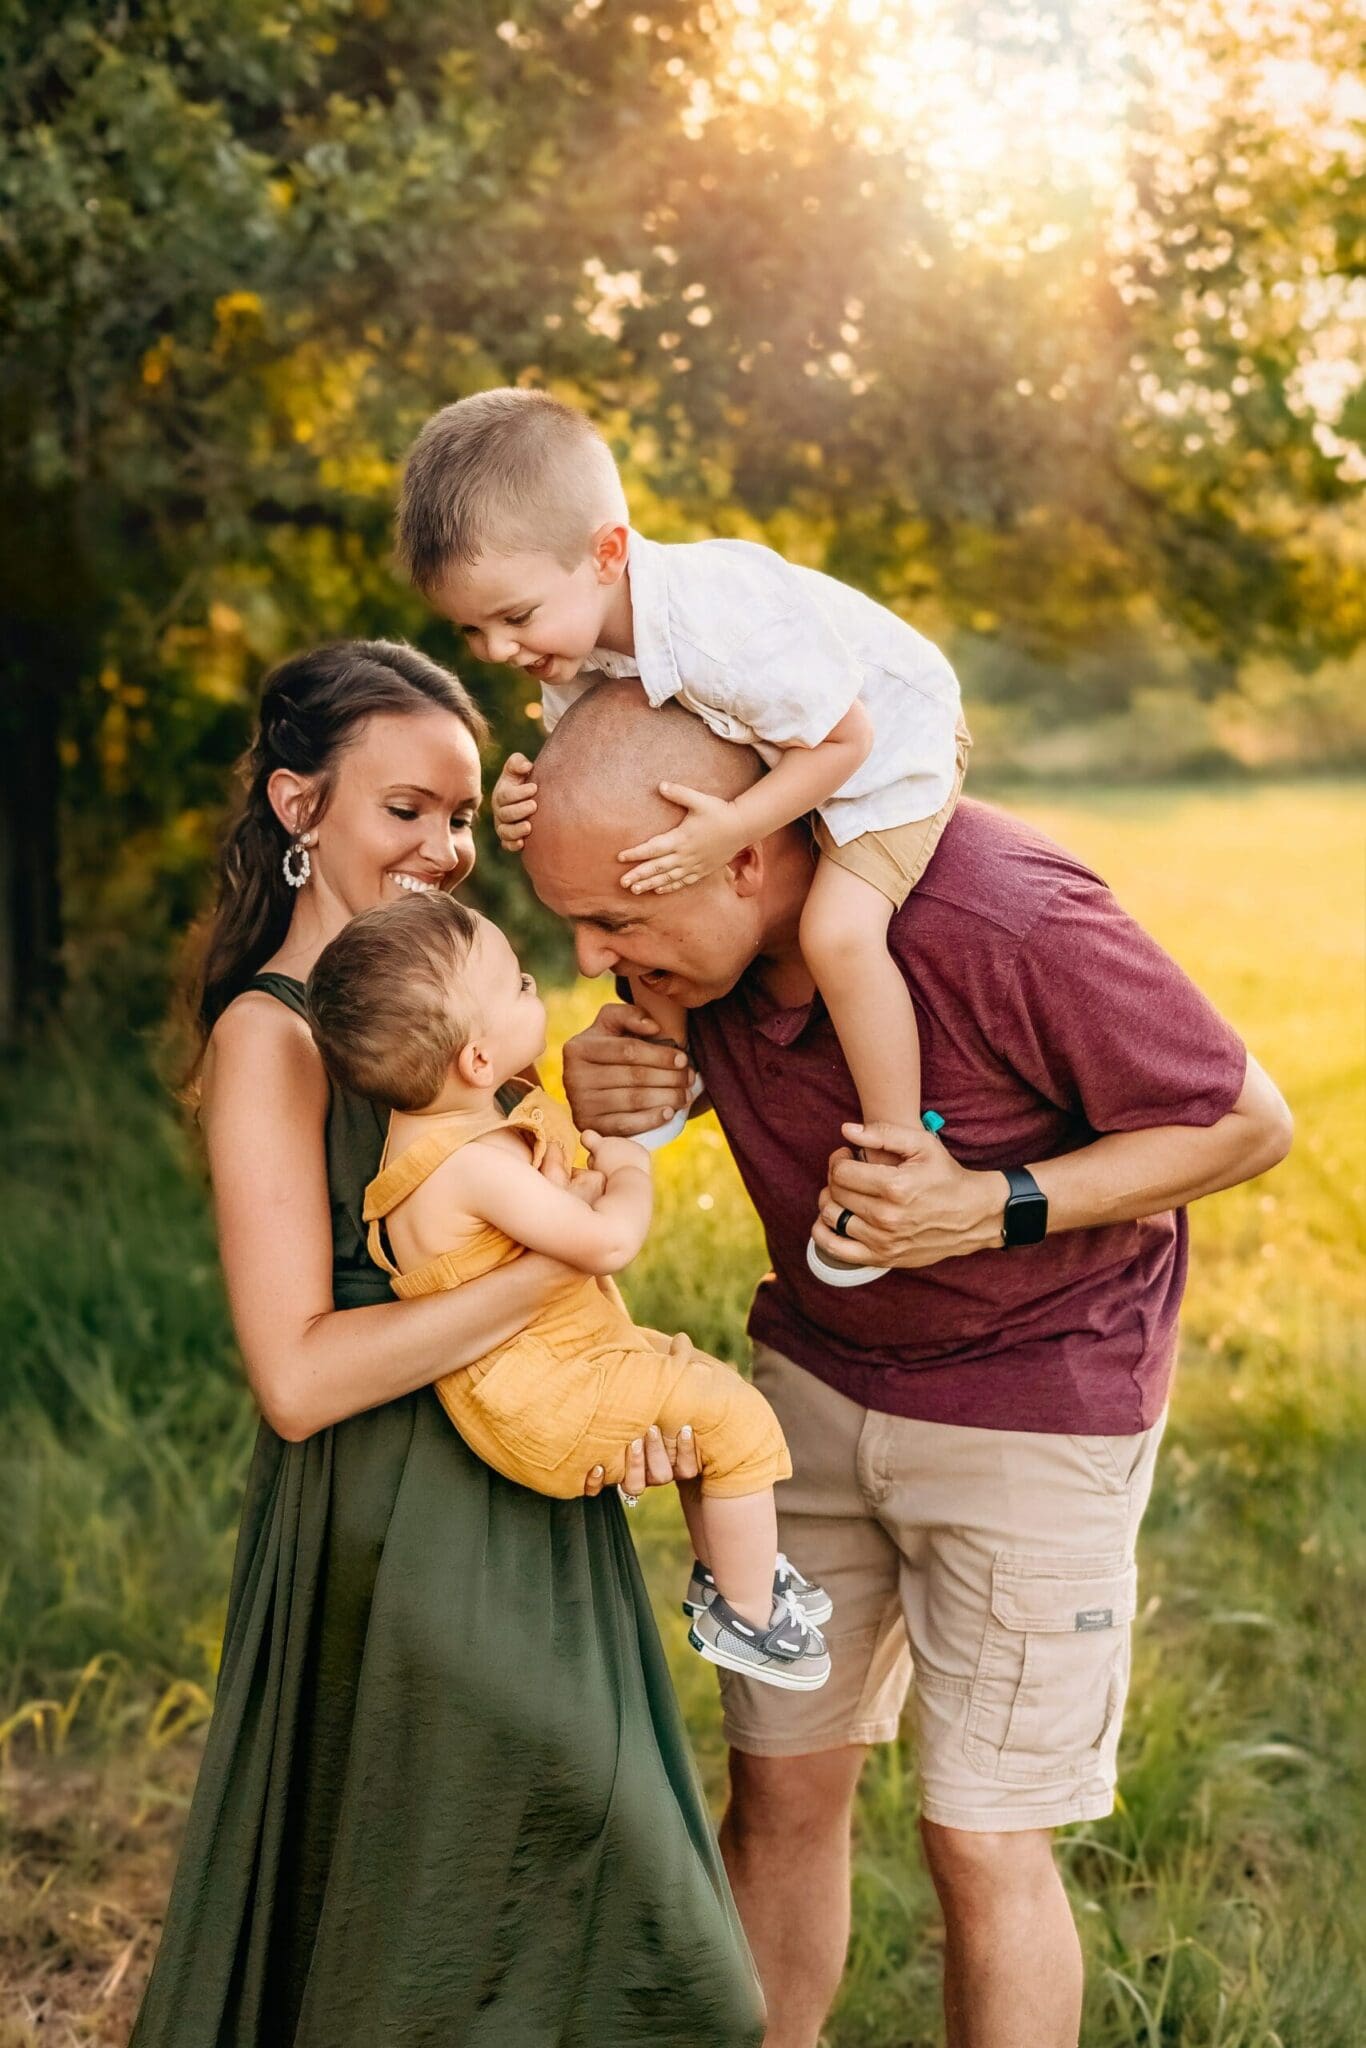 Dad carries toddler on his should and leans over to get a giggle out of the baby in mom's arms during a sunset toddler photo session.